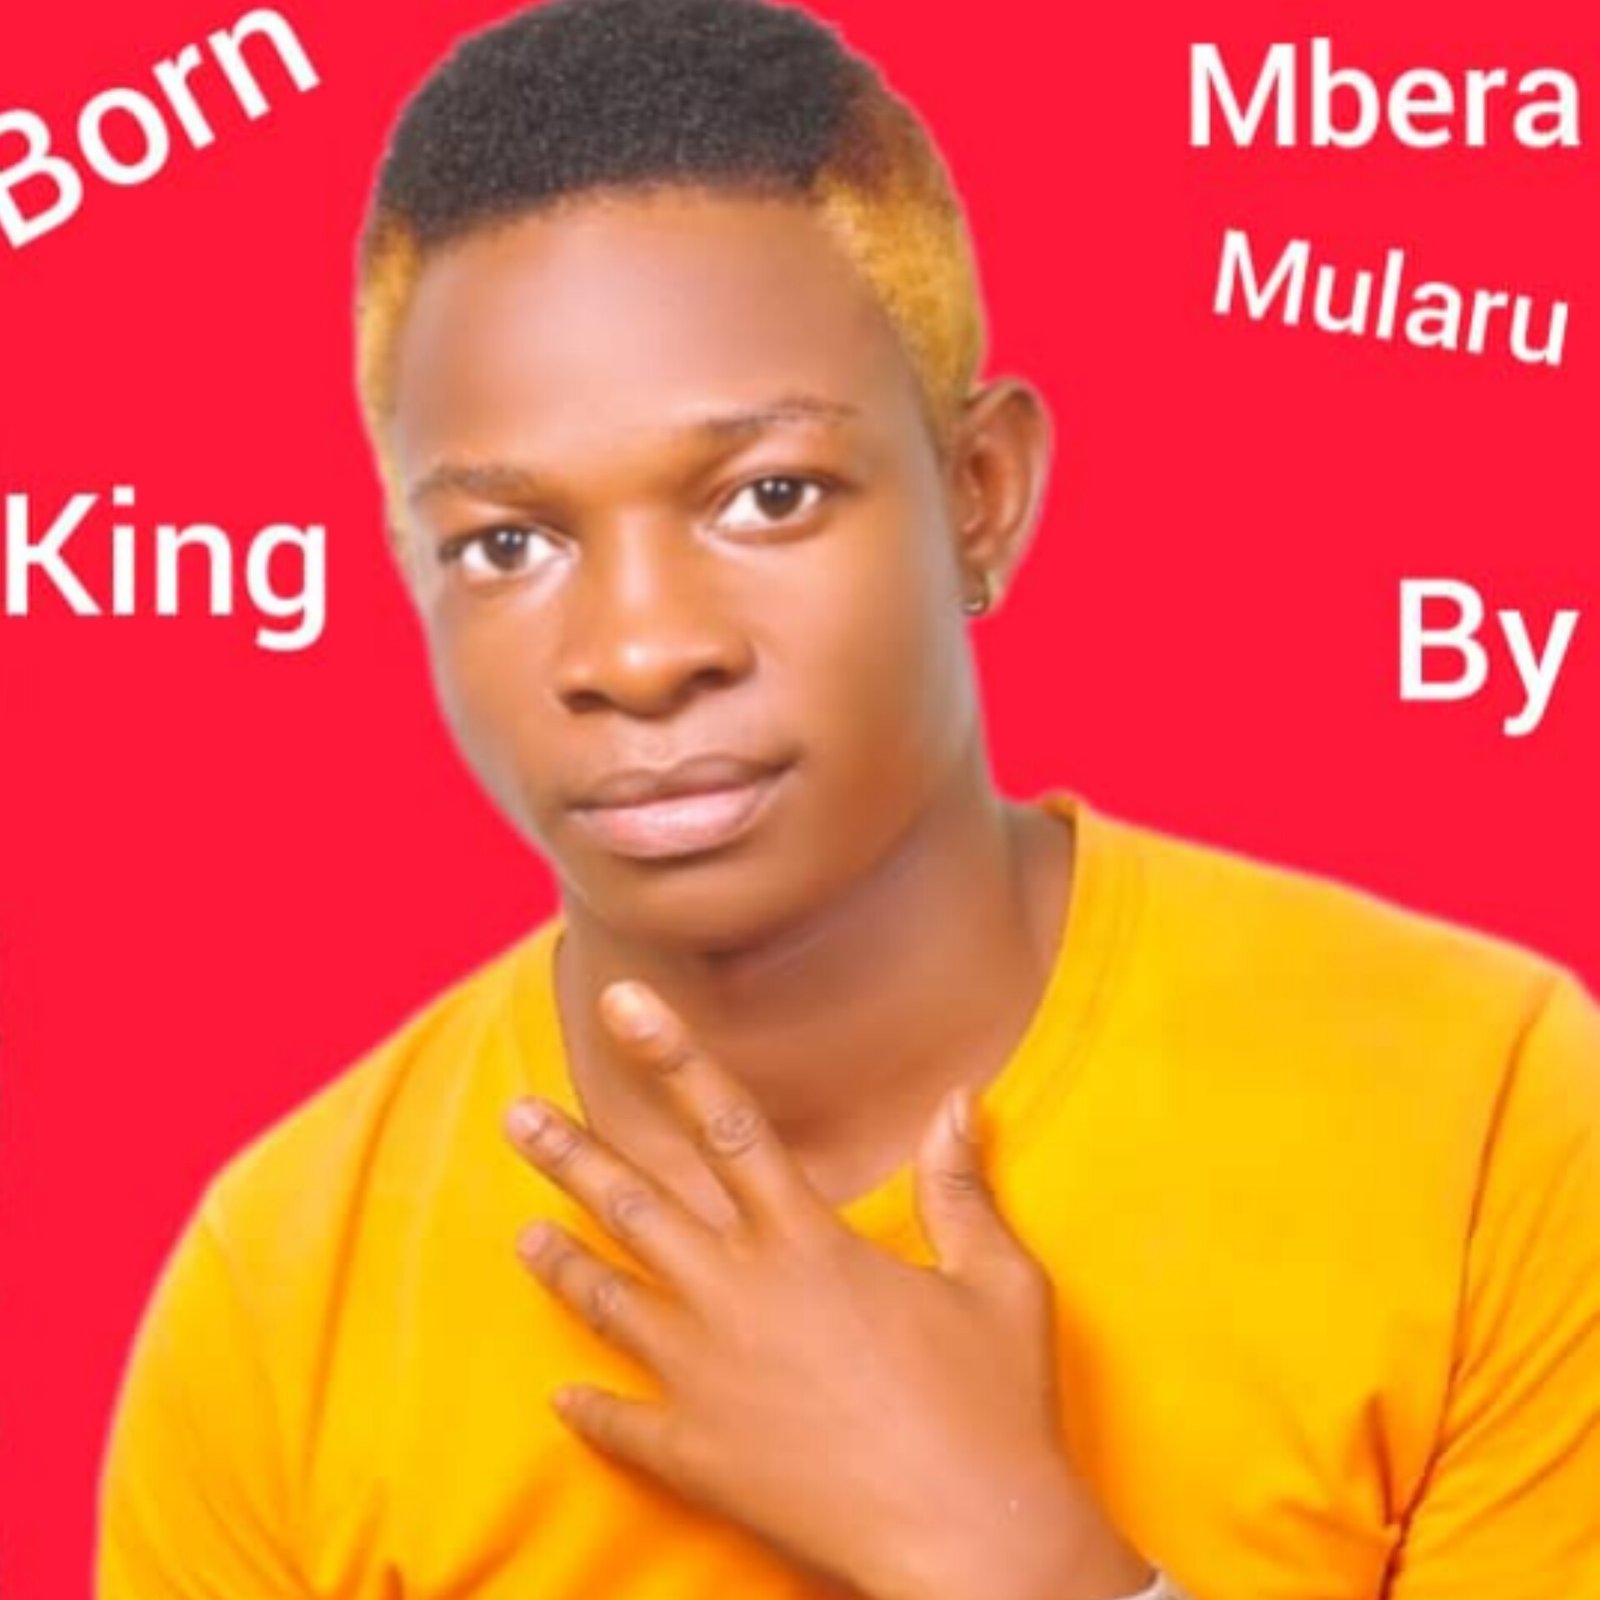 Born King Official